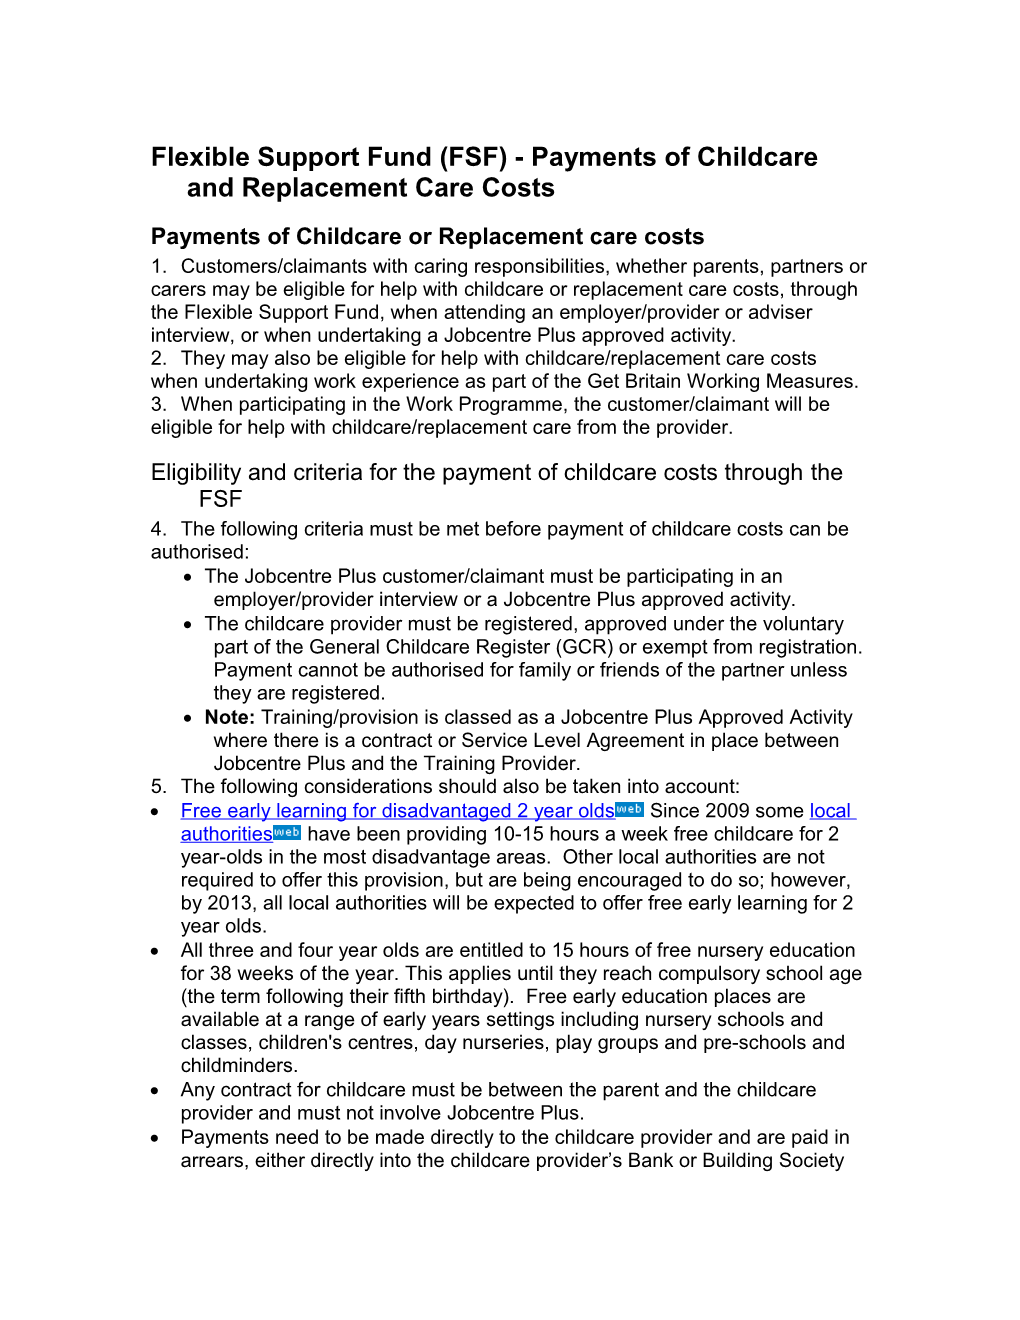 Flexible Support Fund (FSF) - Payments of Childcare and Replacement Care Costs